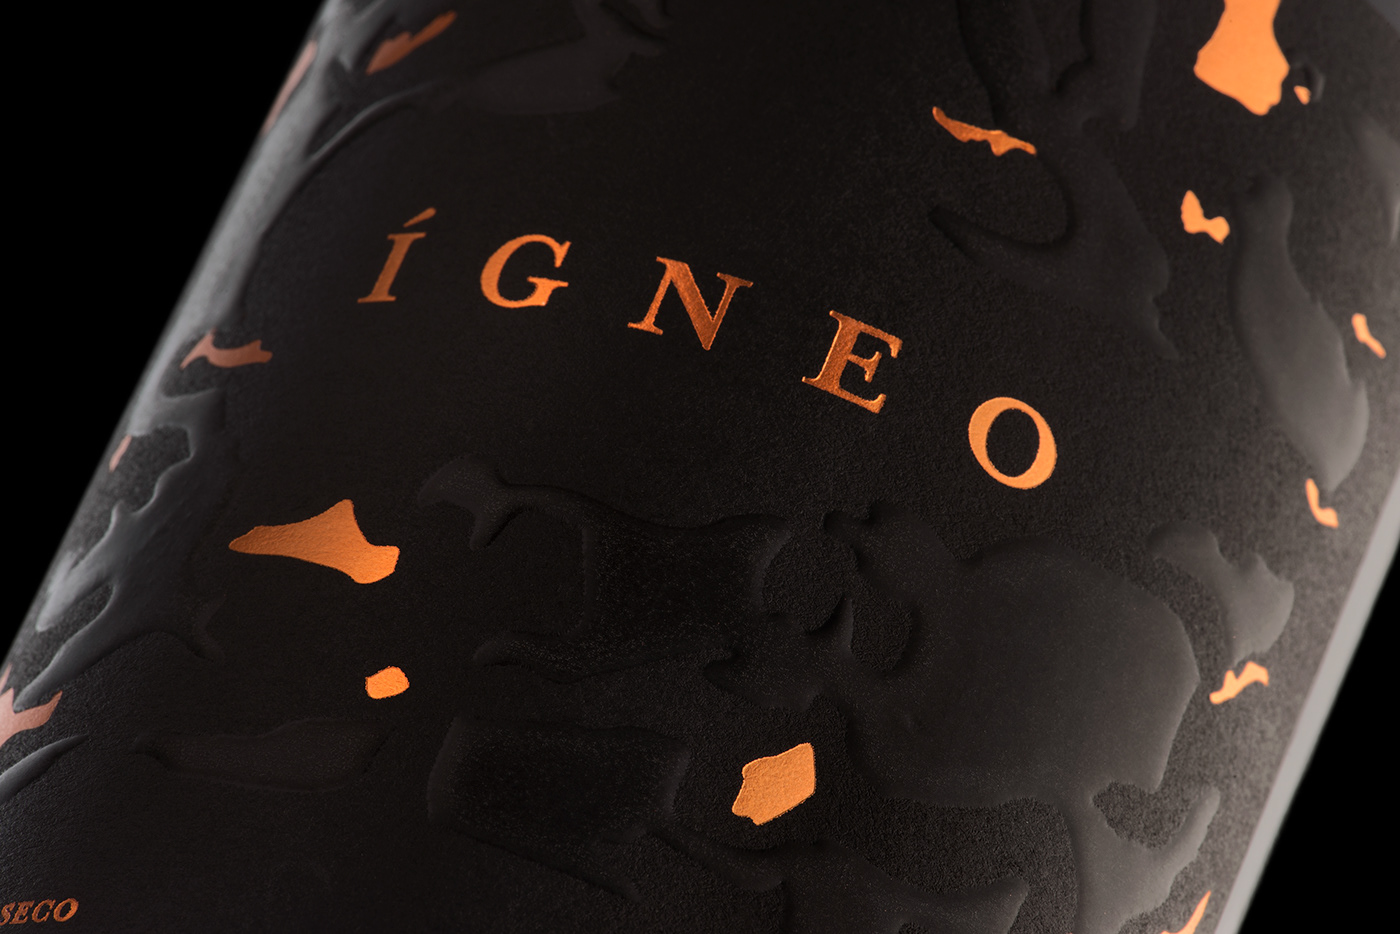 Awards ChileanWine graphicdesign Labeldesign Packaging packagingdesign red volcano wine Winepackaging ladawards volcán